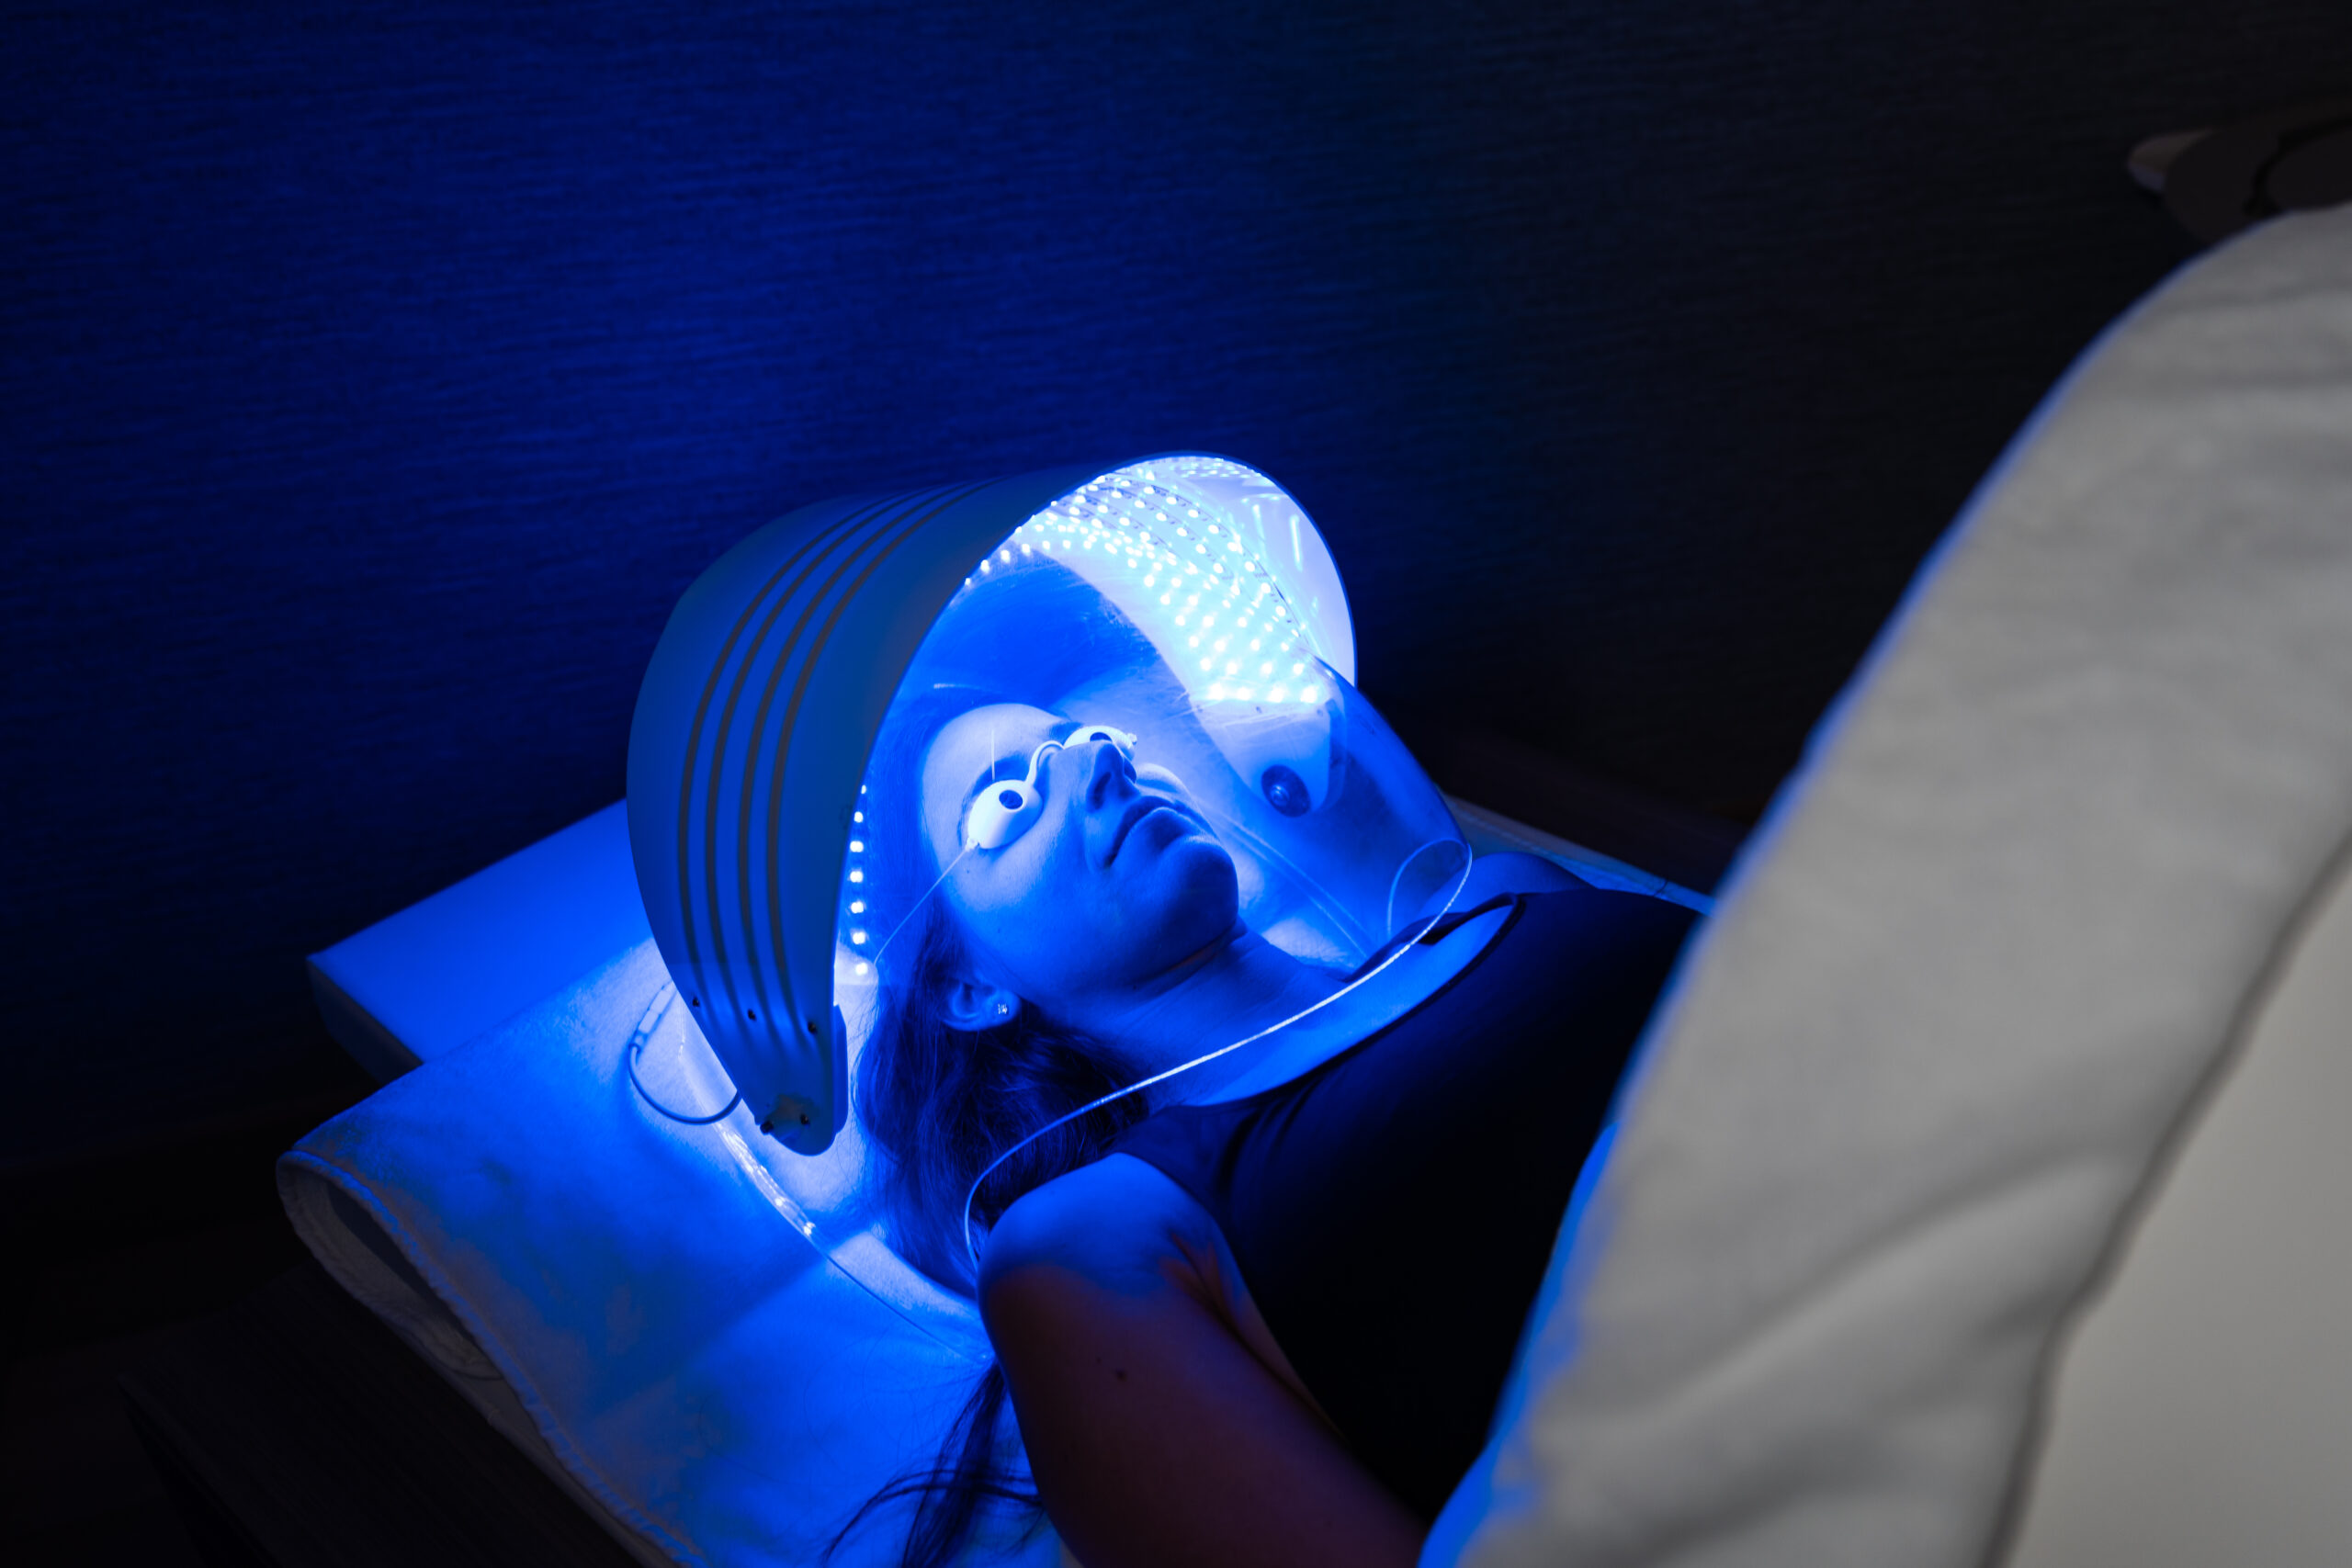 <Girl with glasses in a tanning bed